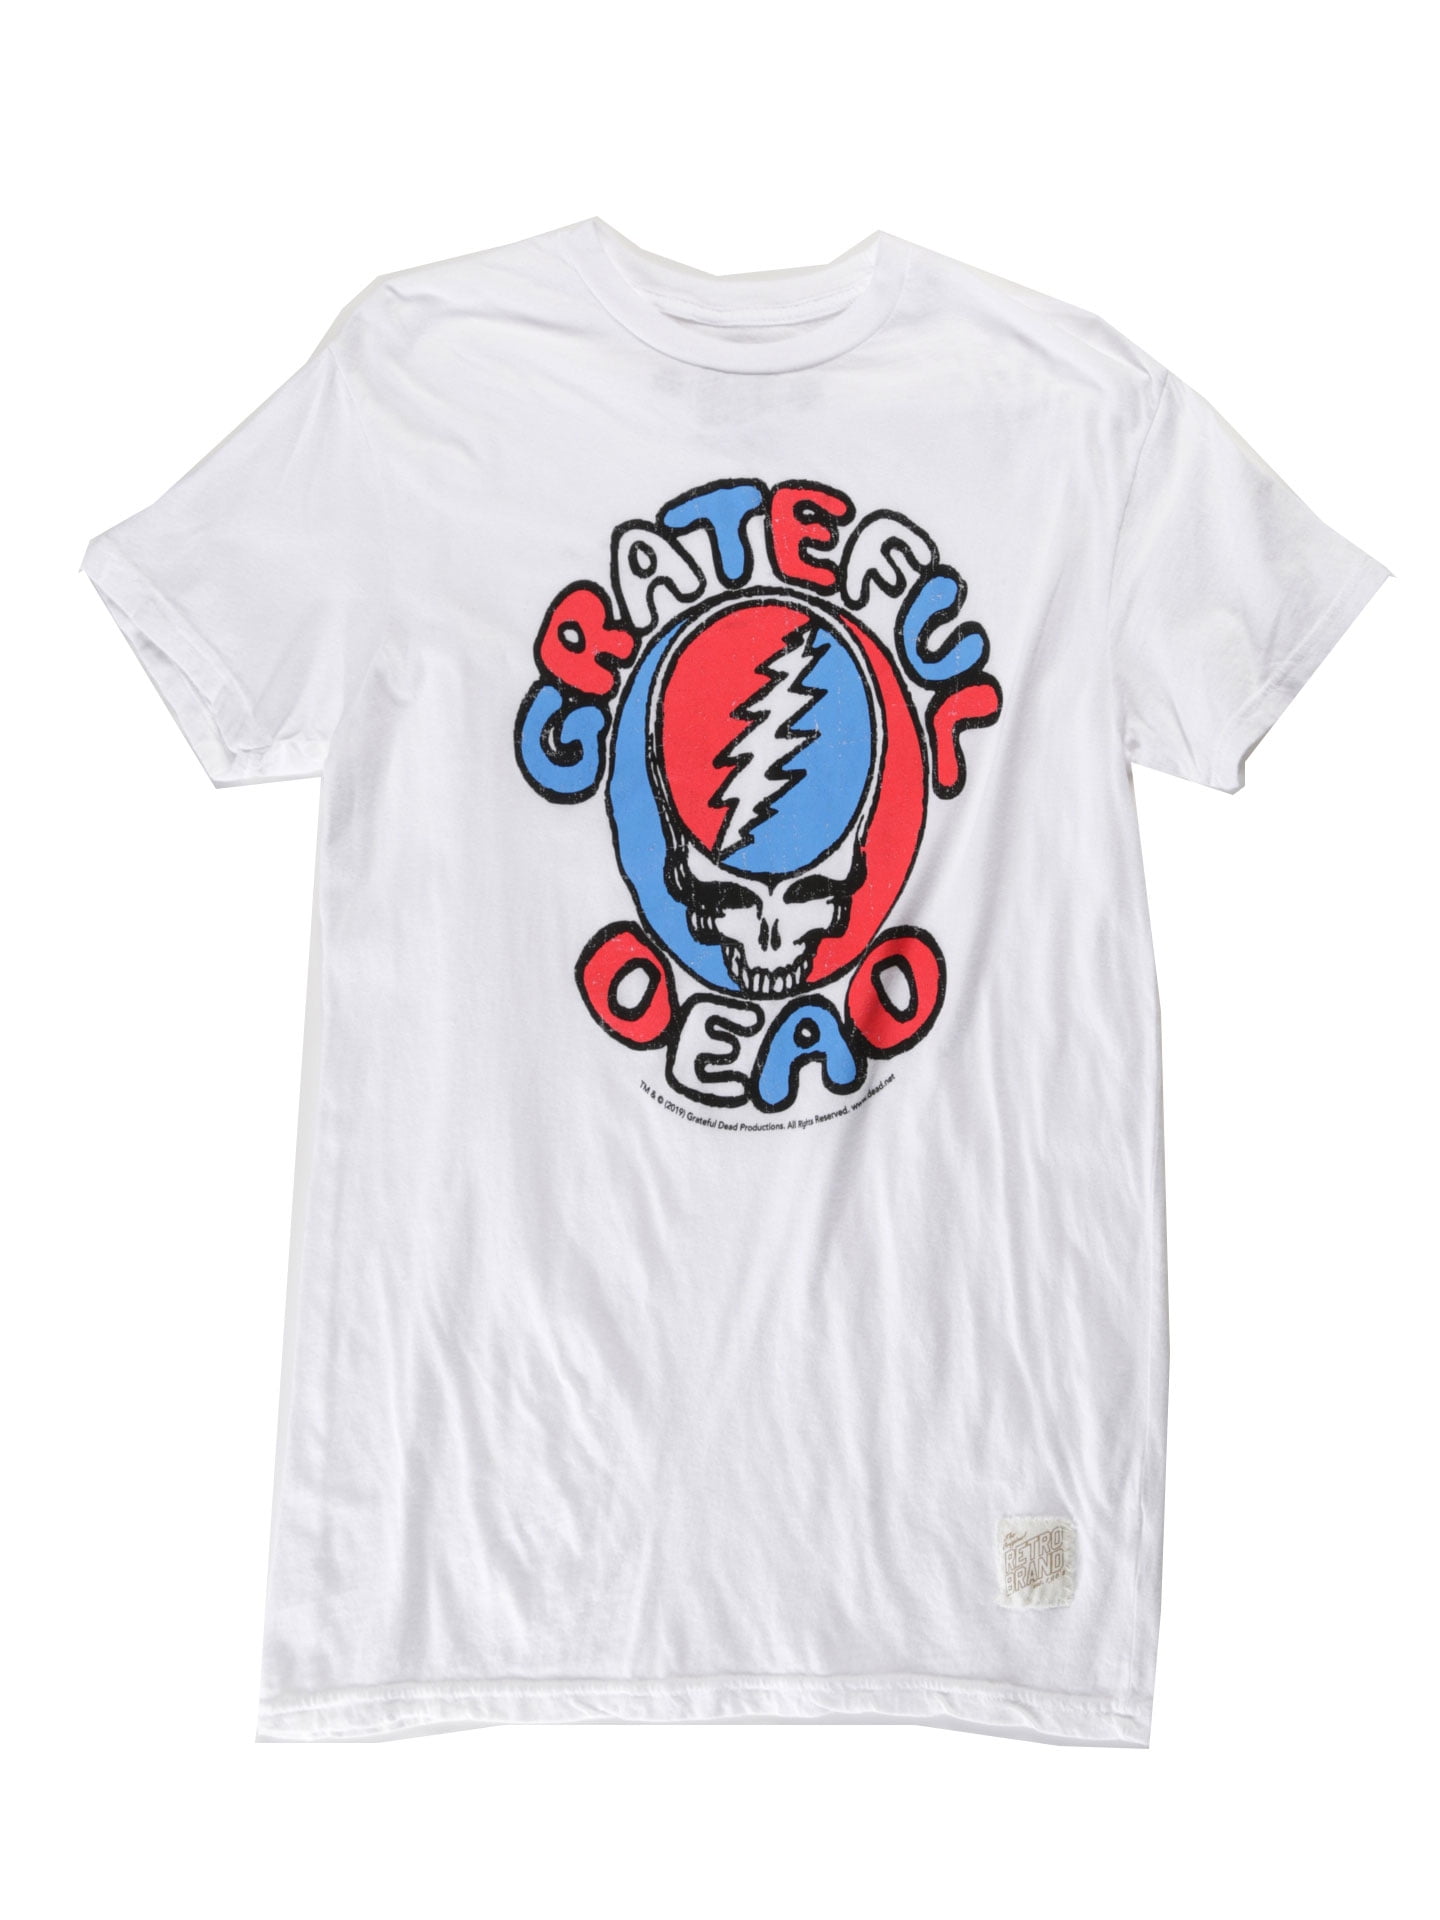 TM Band Logo Printed on a Unisex Cotton Tee Available in 8 Sizes and 3 Colors Grateful Dead